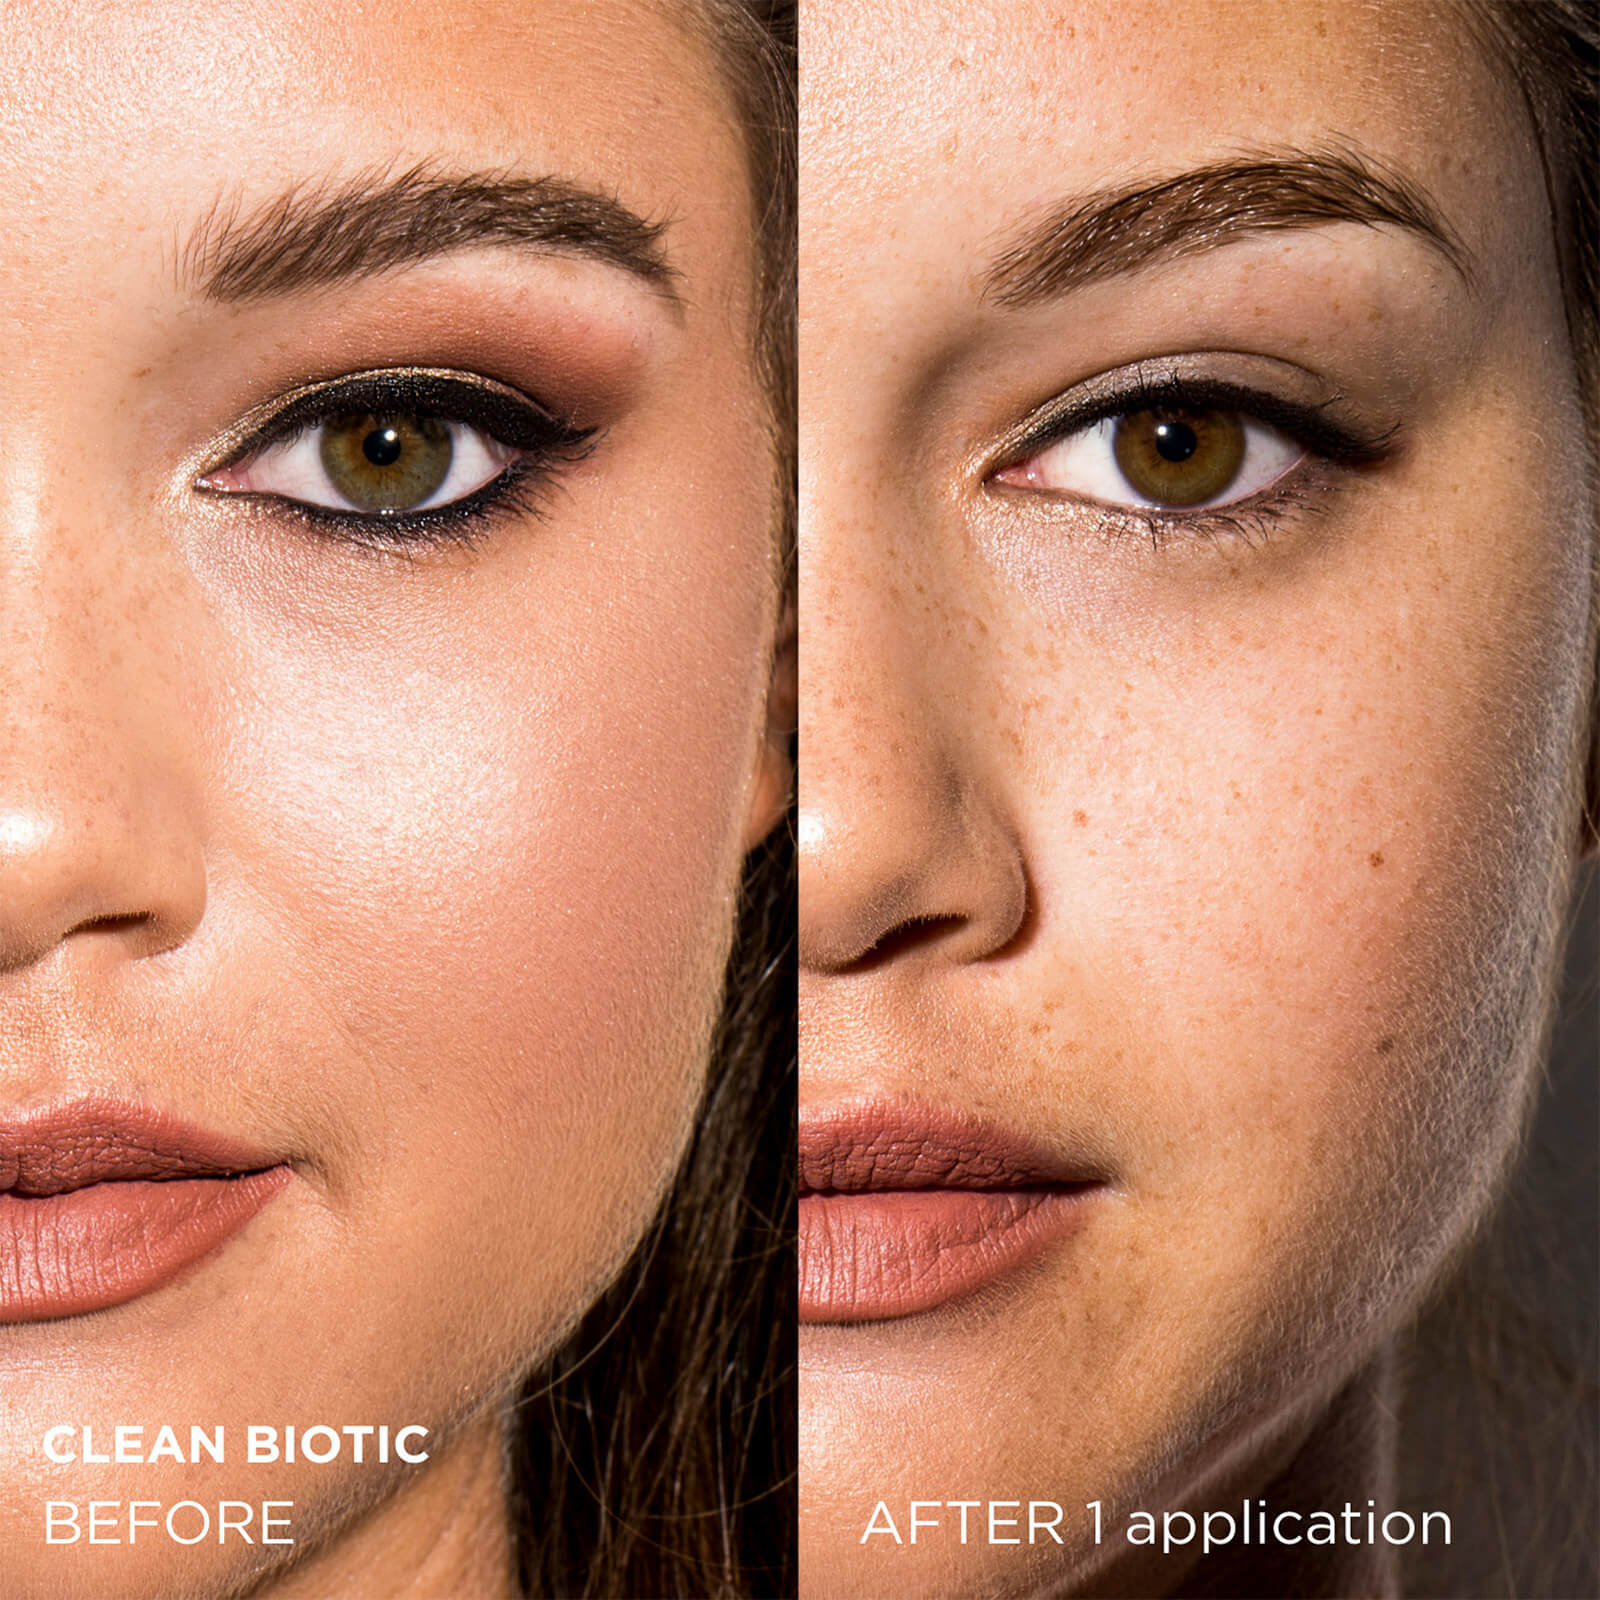 Clean biotic BEFORE, AFTER 1 application